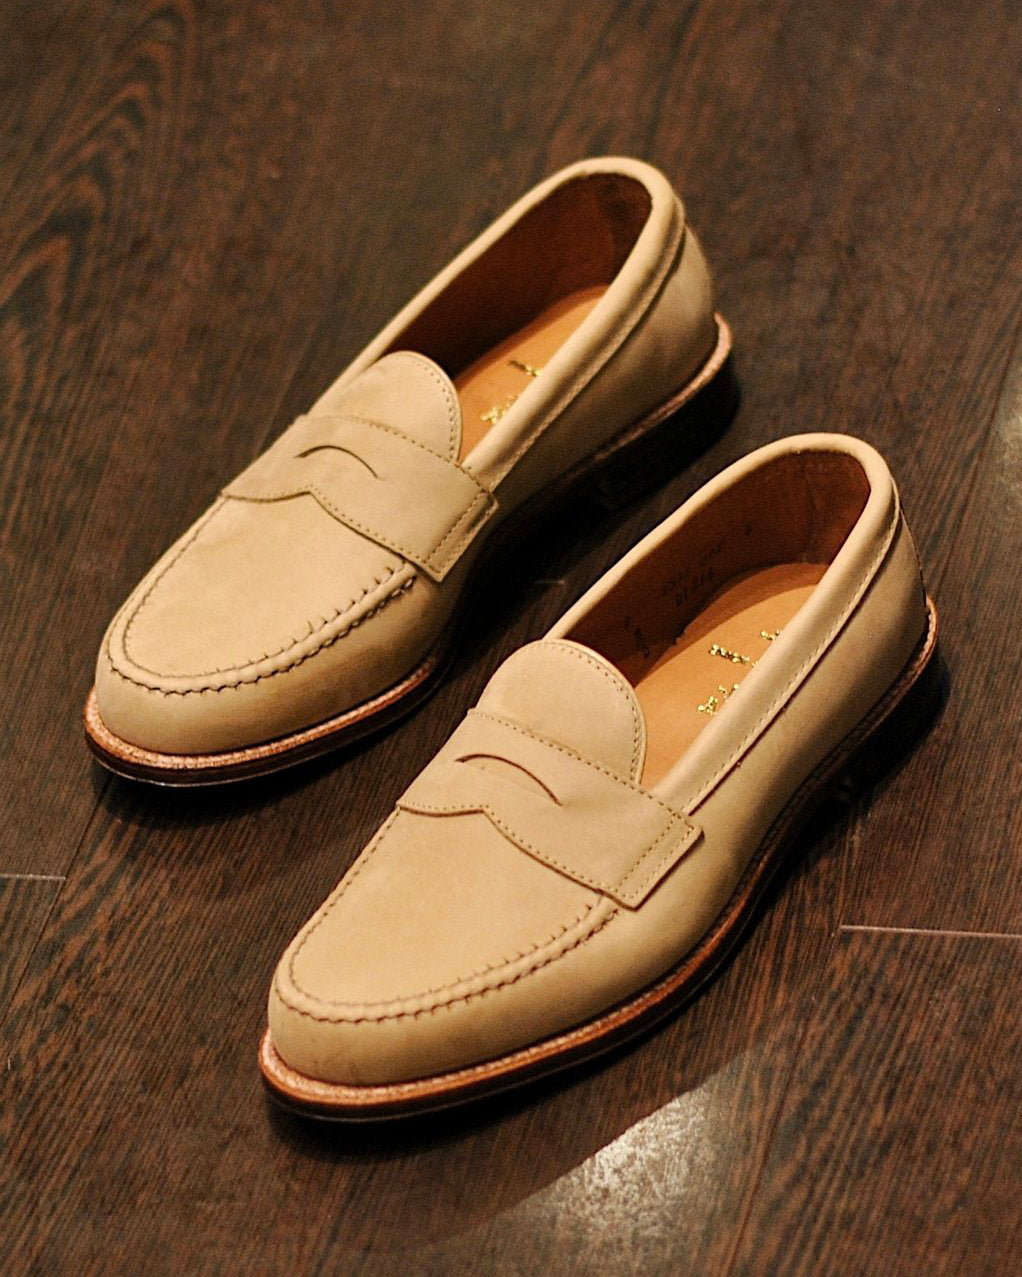 Tan Nubuck Lined LHS Loafer (Limited Edition)